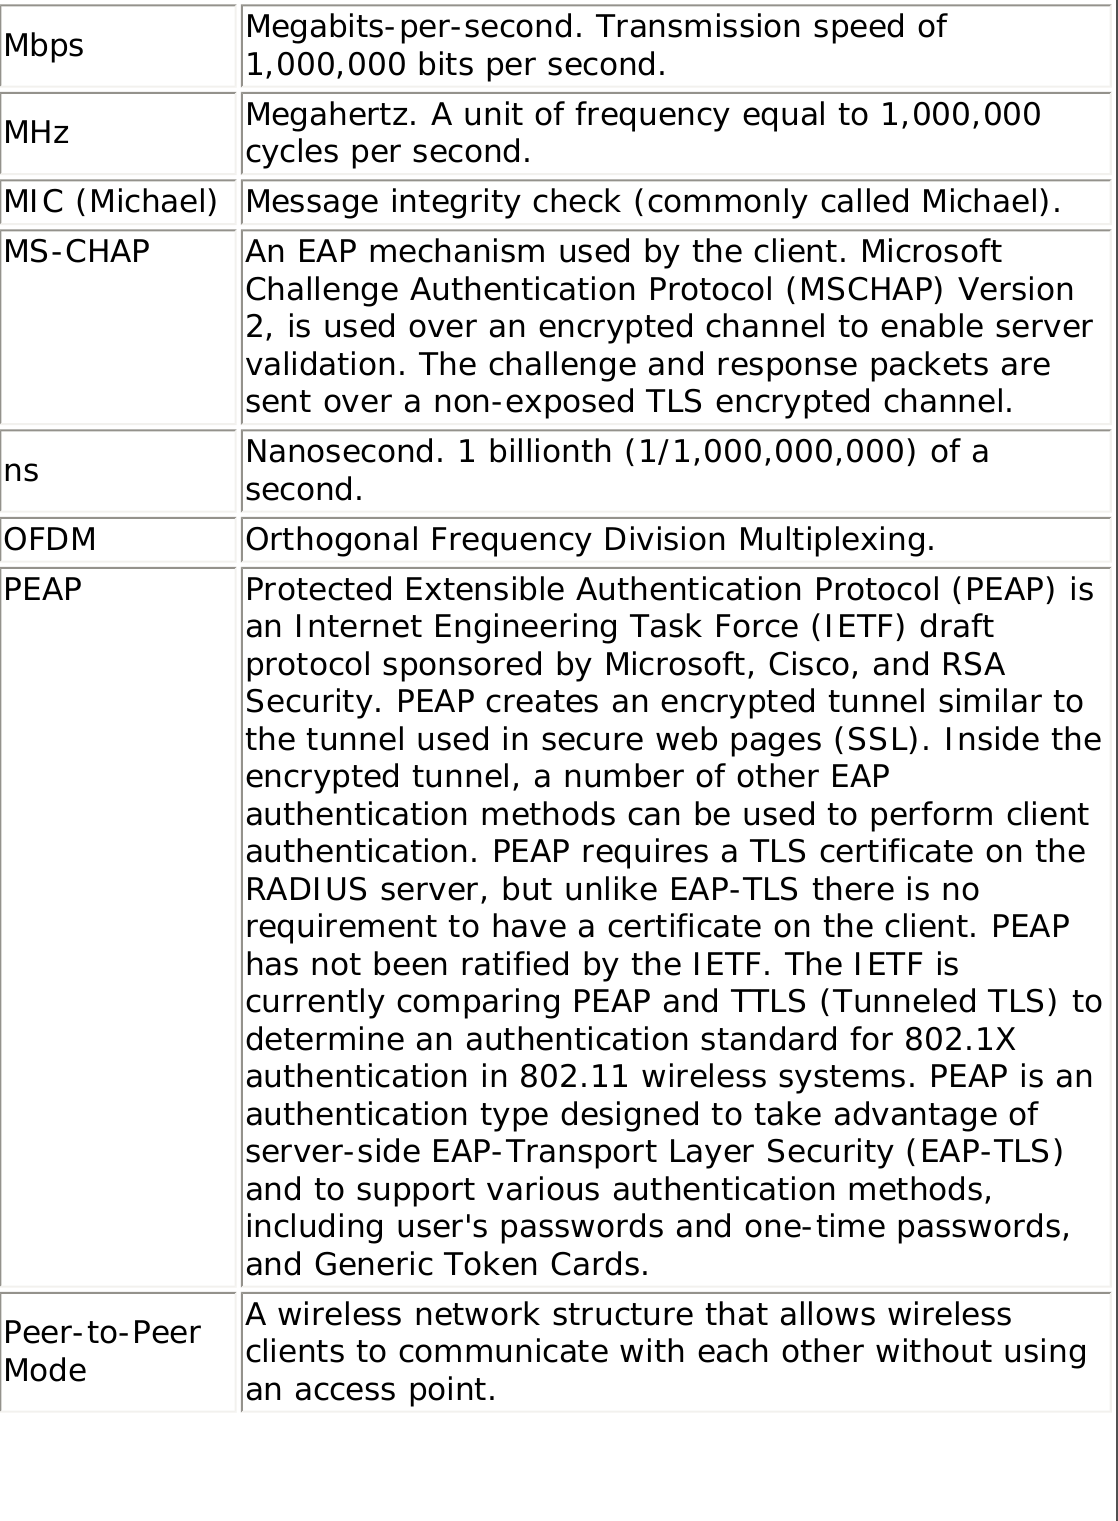 Mbps Megabits-per-second. Transmission speed of 1,000,000 bits per second.MHz Megahertz. A unit of frequency equal to 1,000,000 cycles per second.MIC (Michael) Message integrity check (commonly called Michael).MS-CHAP An EAP mechanism used by the client. Microsoft Challenge Authentication Protocol (MSCHAP) Version 2, is used over an encrypted channel to enable server validation. The challenge and response packets are sent over a non-exposed TLS encrypted channel.ns Nanosecond. 1 billionth (1/1,000,000,000) of a second.OFDM Orthogonal Frequency Division Multiplexing.PEAP Protected Extensible Authentication Protocol (PEAP) is an Internet Engineering Task Force (IETF) draft protocol sponsored by Microsoft, Cisco, and RSA Security. PEAP creates an encrypted tunnel similar to the tunnel used in secure web pages (SSL). Inside the encrypted tunnel, a number of other EAP authentication methods can be used to perform client authentication. PEAP requires a TLS certificate on the RADIUS server, but unlike EAP-TLS there is no requirement to have a certificate on the client. PEAP has not been ratified by the IETF. The IETF is currently comparing PEAP and TTLS (Tunneled TLS) to determine an authentication standard for 802.1X authentication in 802.11 wireless systems. PEAP is an authentication type designed to take advantage of server-side EAP-Transport Layer Security (EAP-TLS) and to support various authentication methods, including user&apos;s passwords and one-time passwords, and Generic Token Cards.Peer-to-Peer ModeA wireless network structure that allows wireless clients to communicate with each other without using an access point.